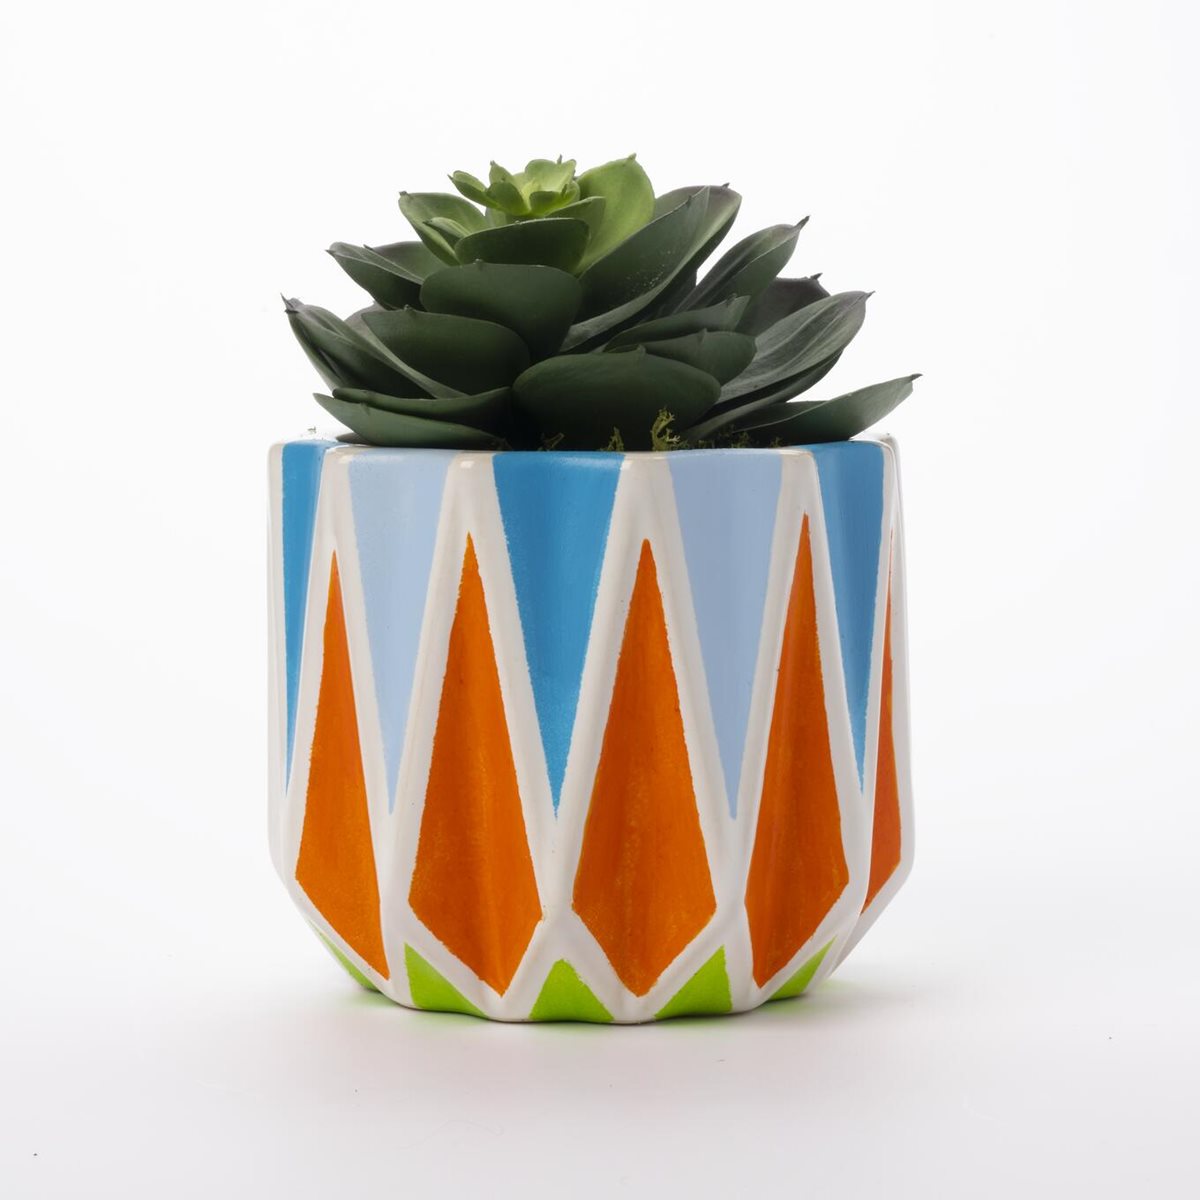 Bright and Geometric Planters